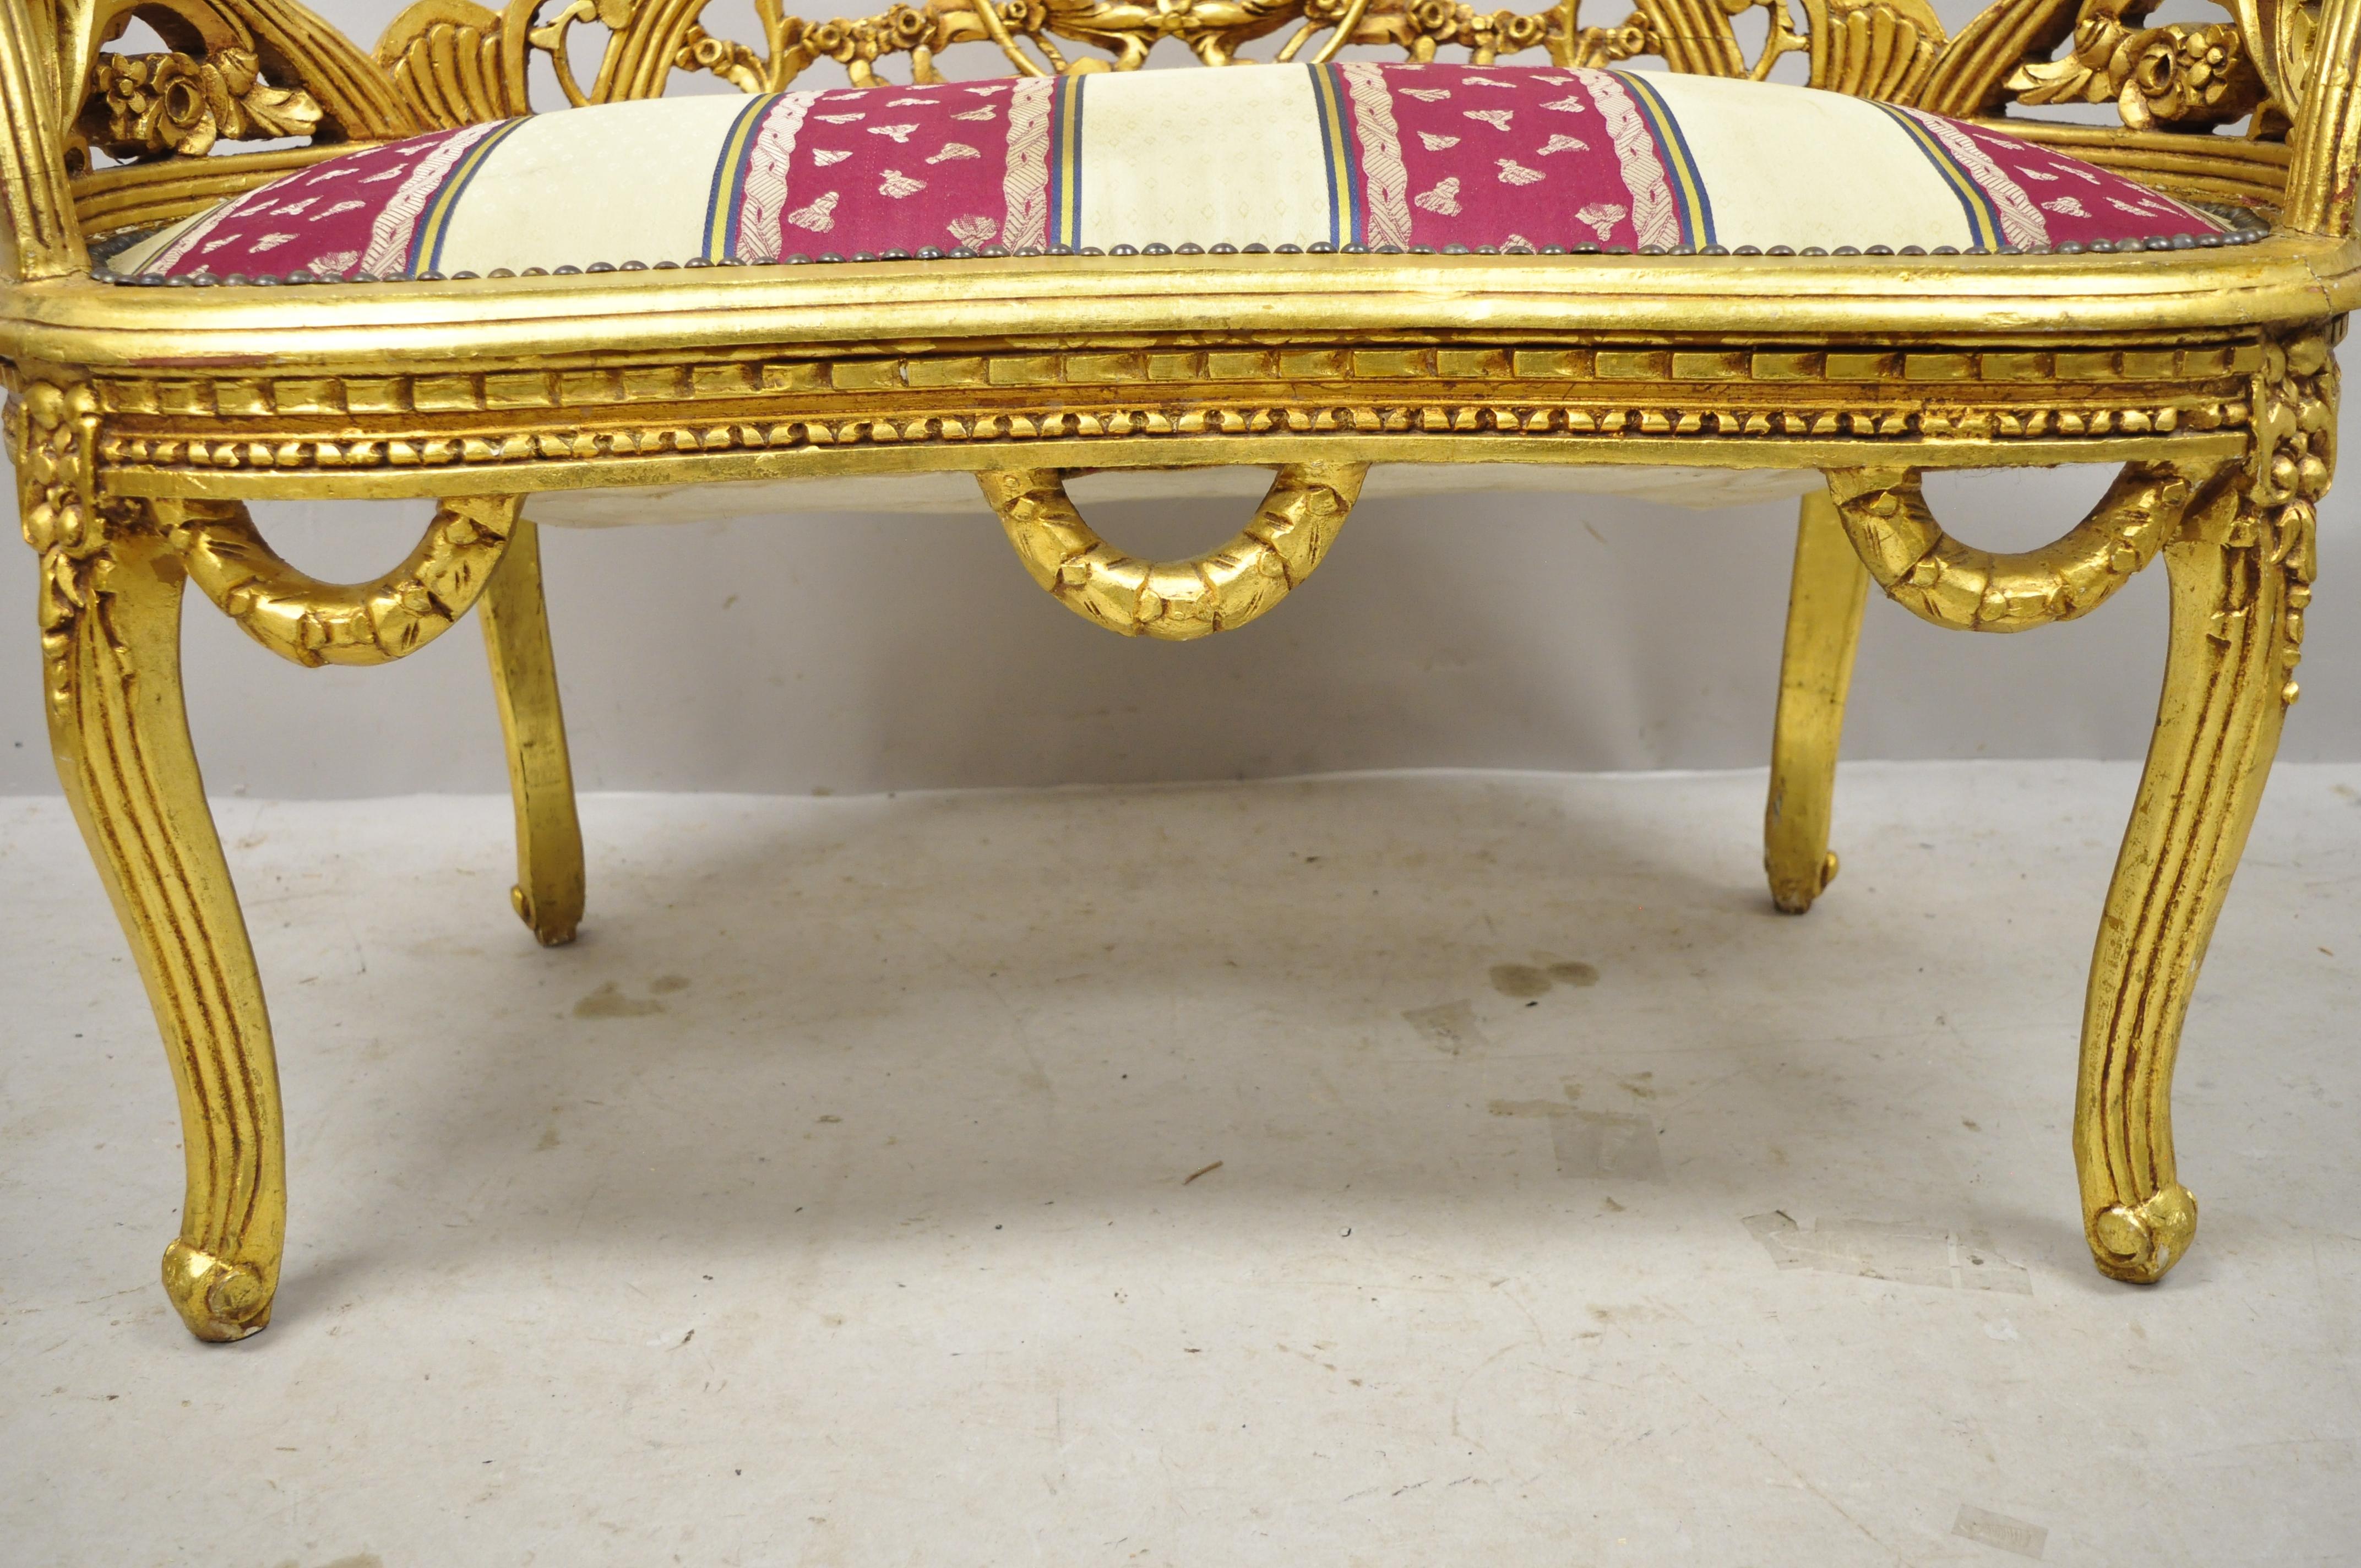 20th Century Vintage French Louis XV Style Gold Giltwood Kidney Shape Carved Vanity Bench